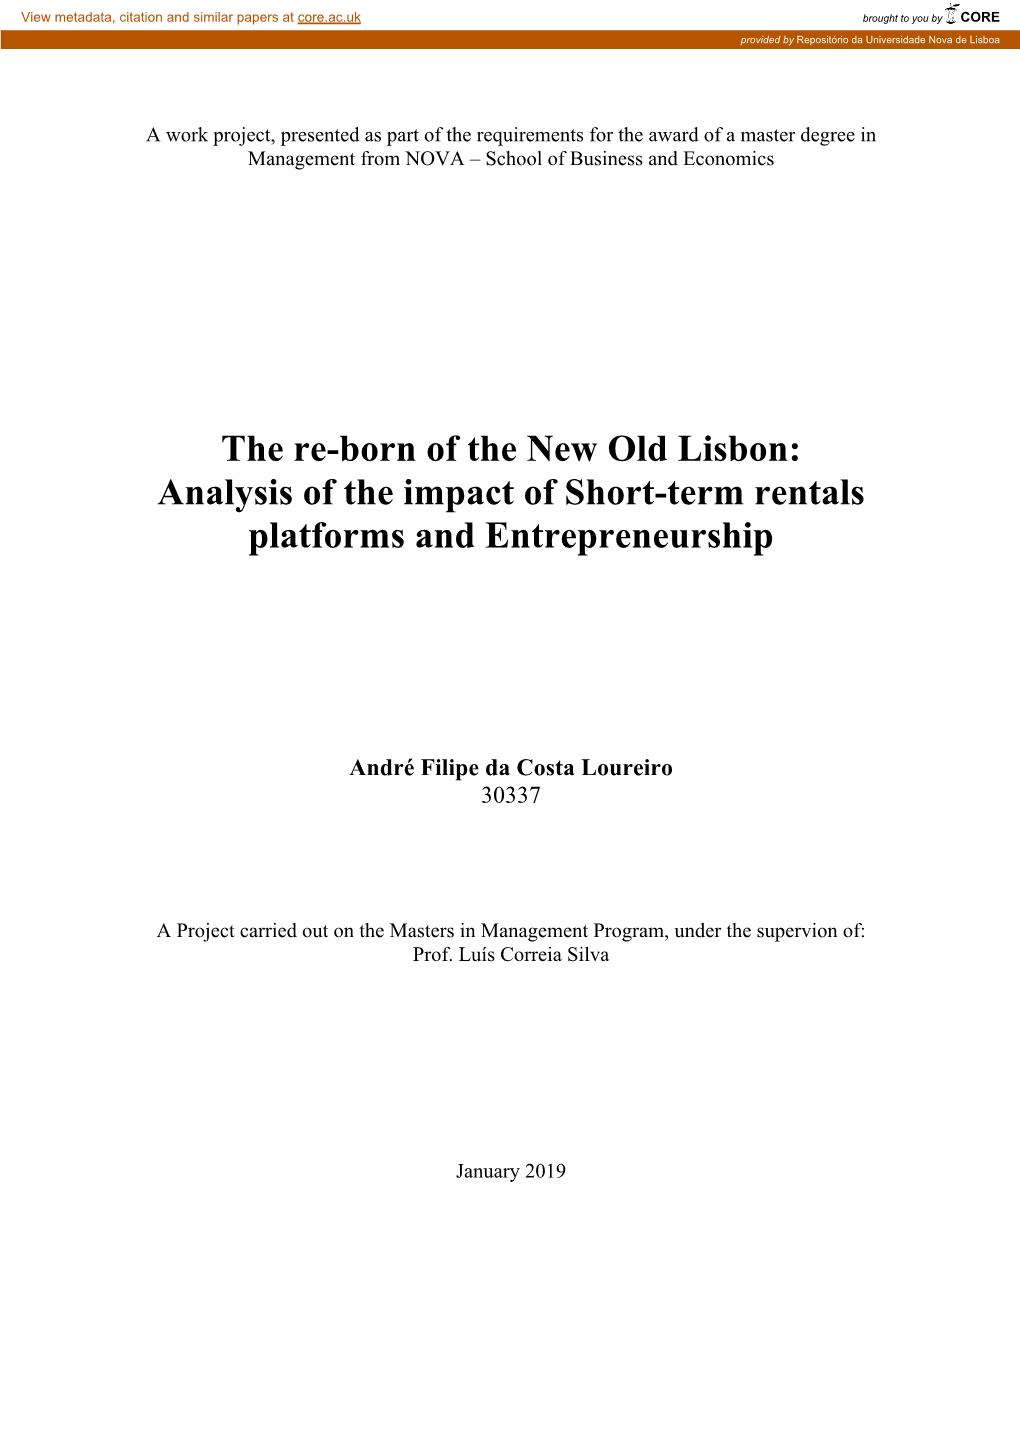 The Re-Born of the New Old Lisbon: Analysis of the Impact of Short-Term Rentals Platforms and Entrepreneurship